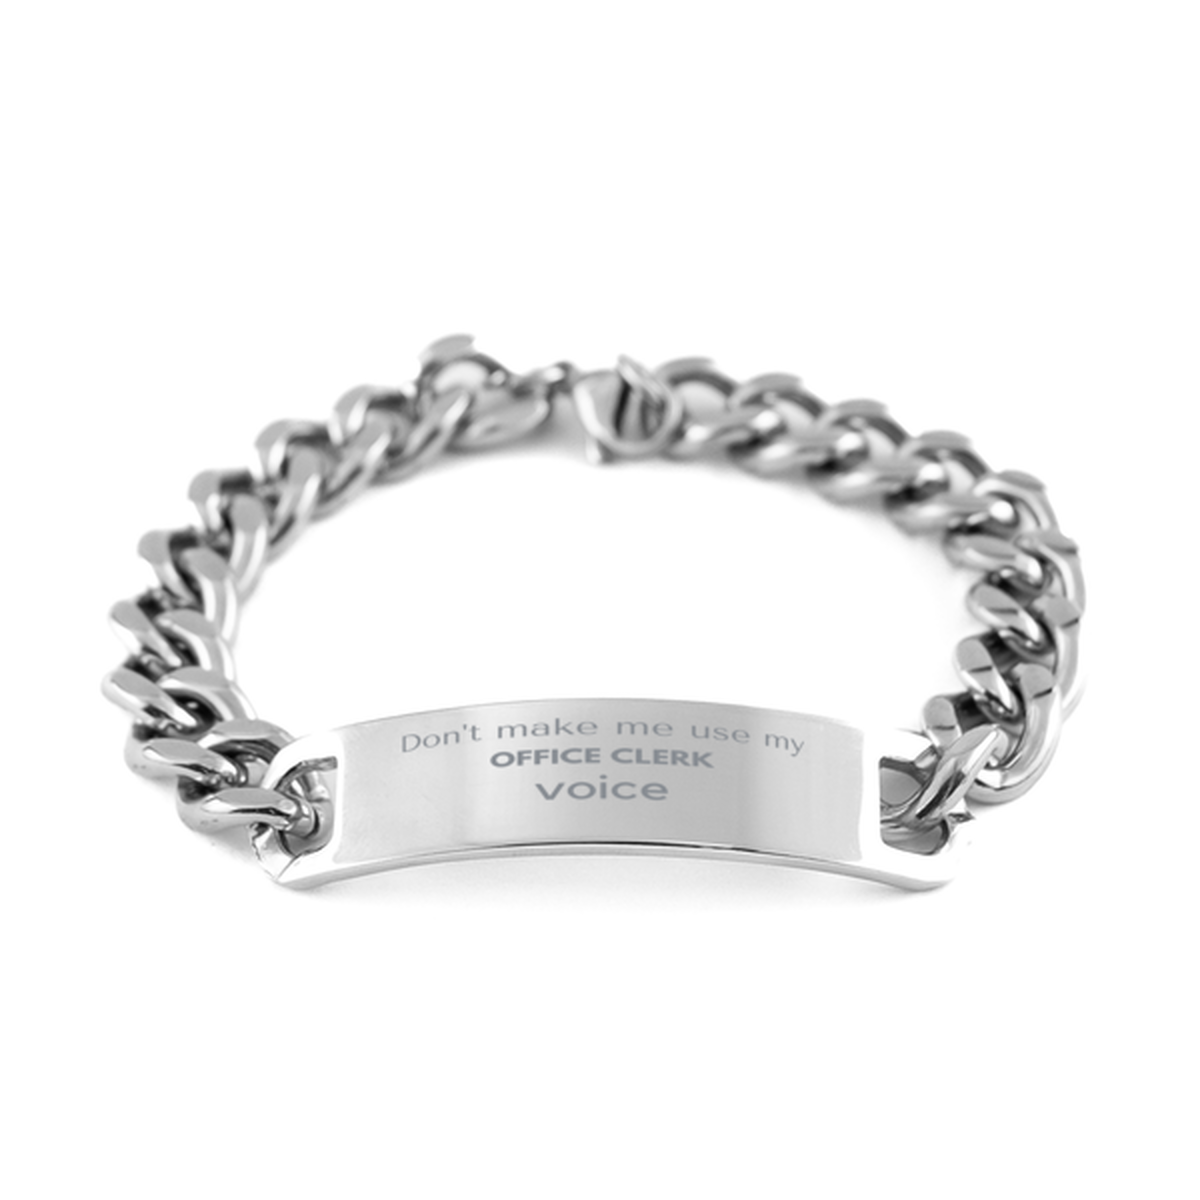 Don't make me use my Office Clerk voice, Sarcasm Office Clerk Gifts, Christmas Office Clerk Cuban Chain Stainless Steel Bracelet Birthday Unique Gifts For Office Clerk Coworkers, Men, Women, Colleague, Friends